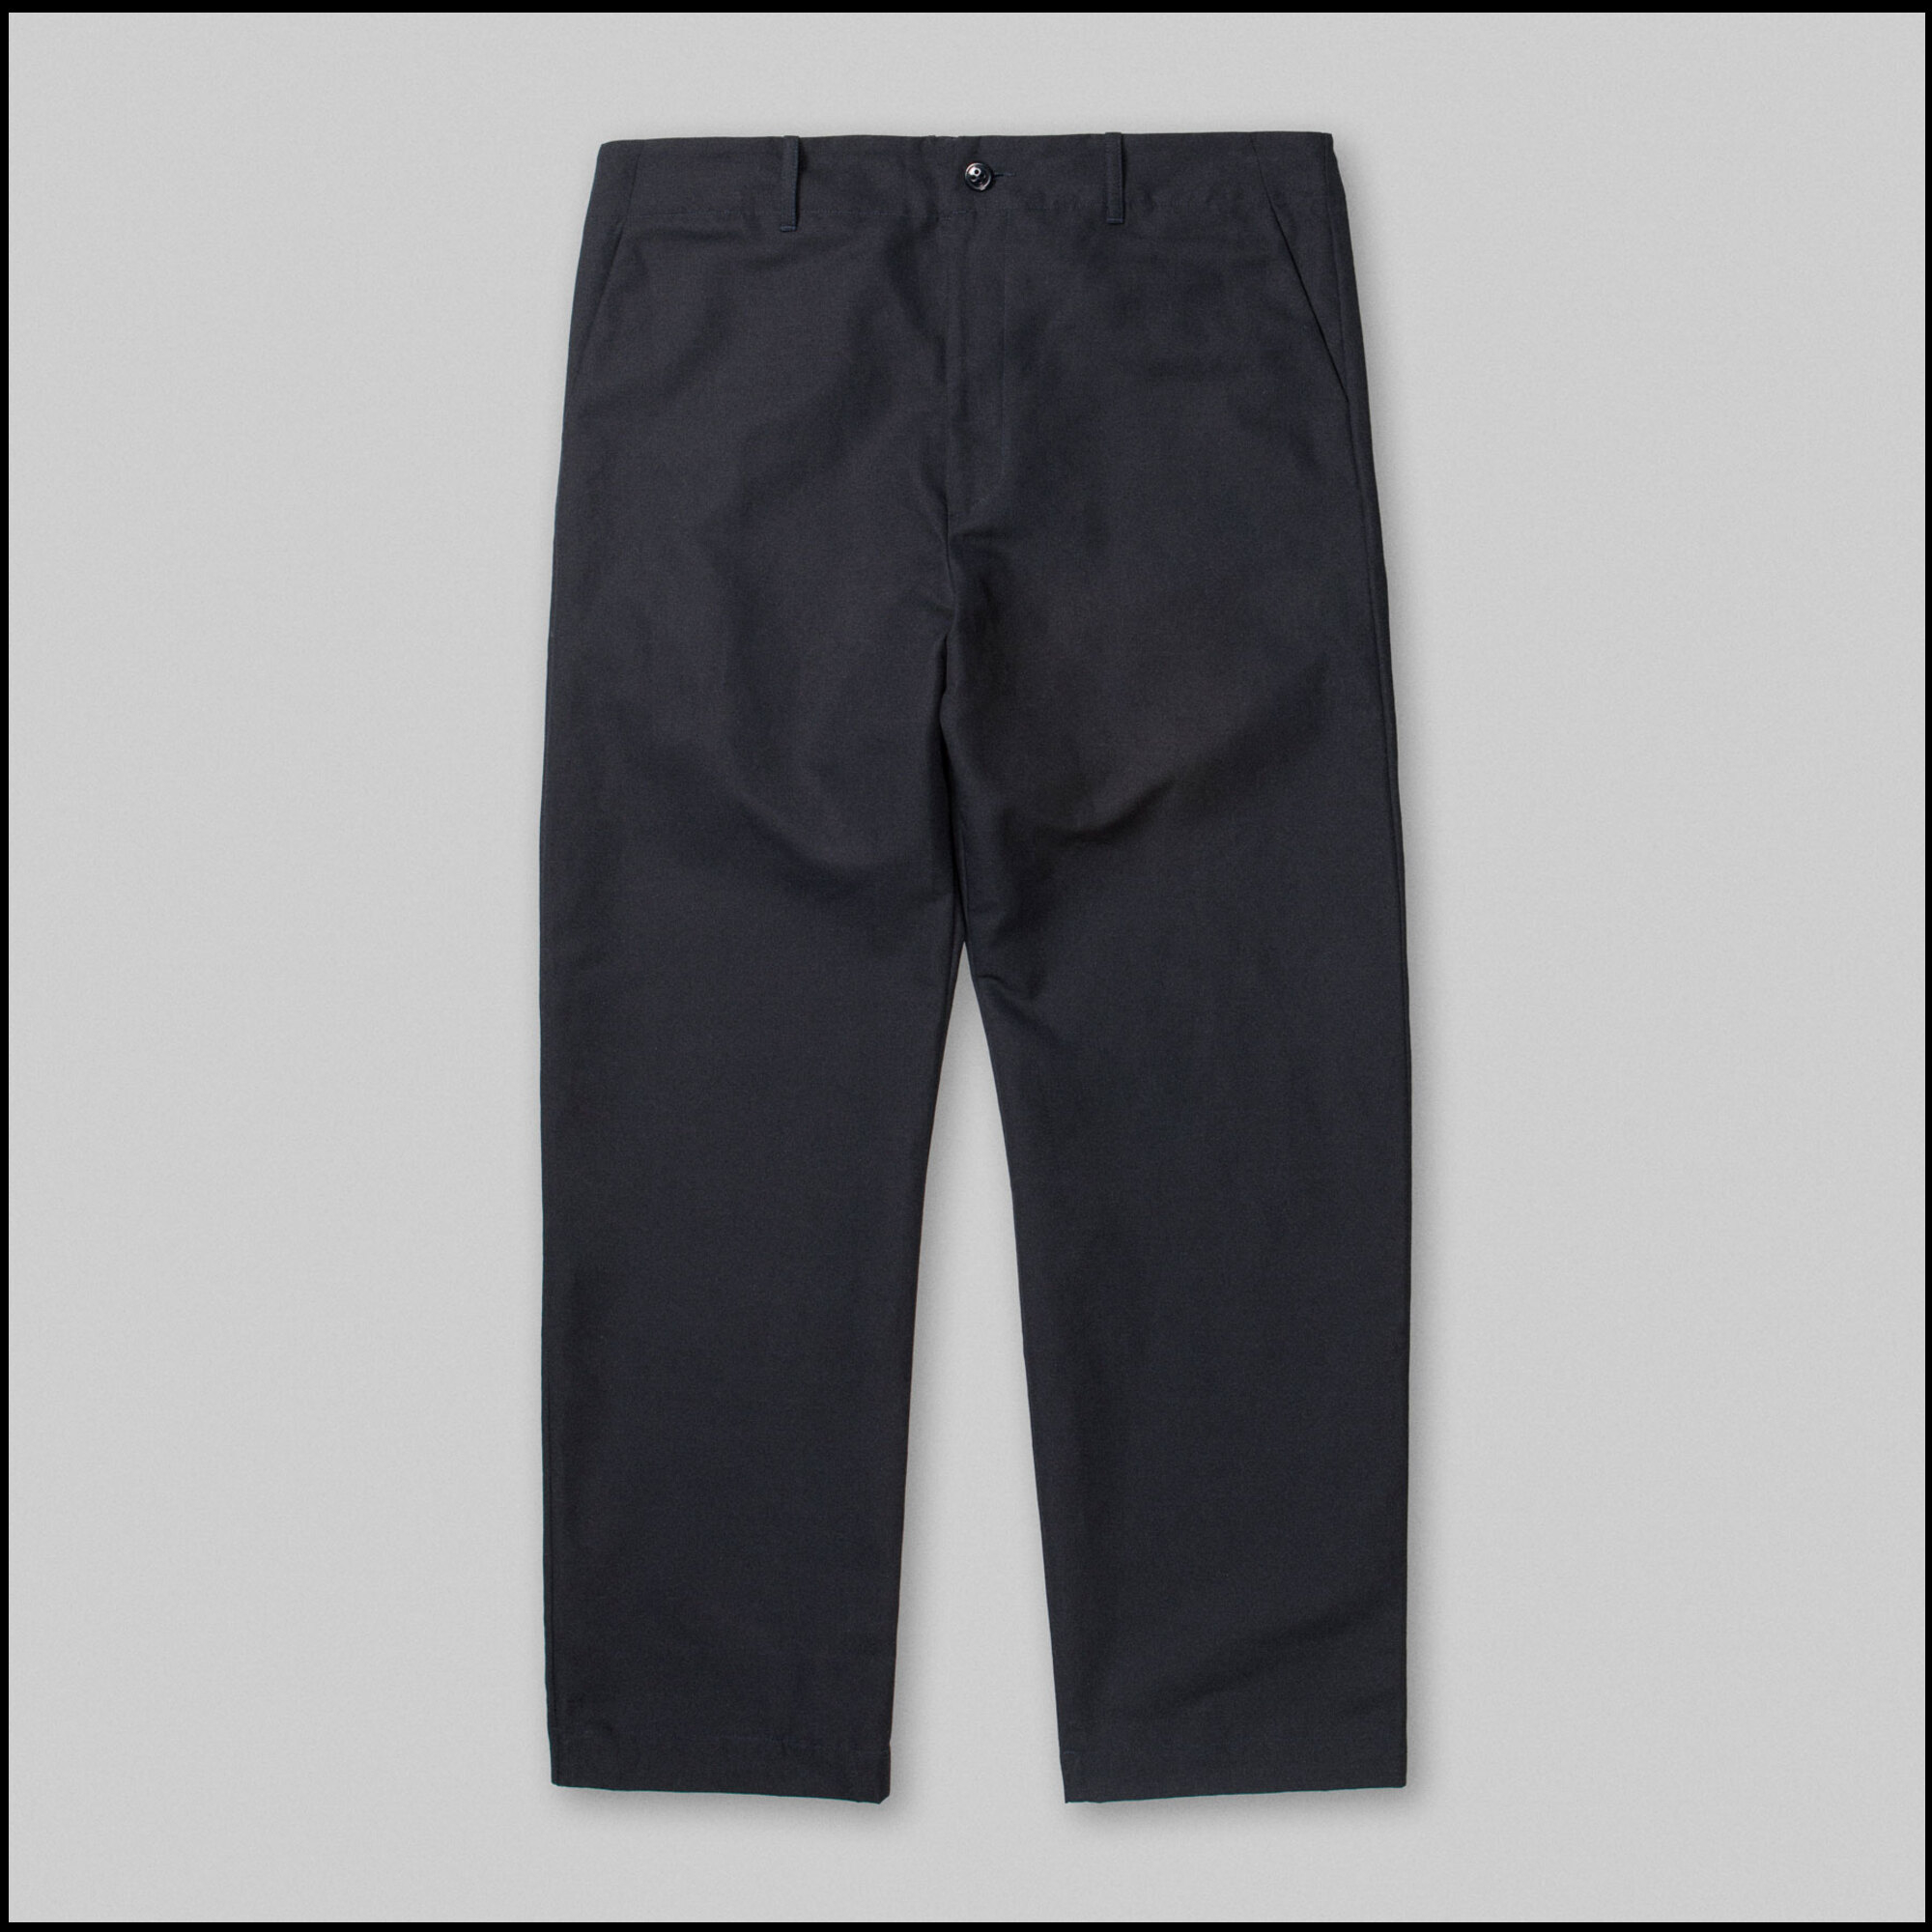 FOX Pants by Arpenteur in Midnight color